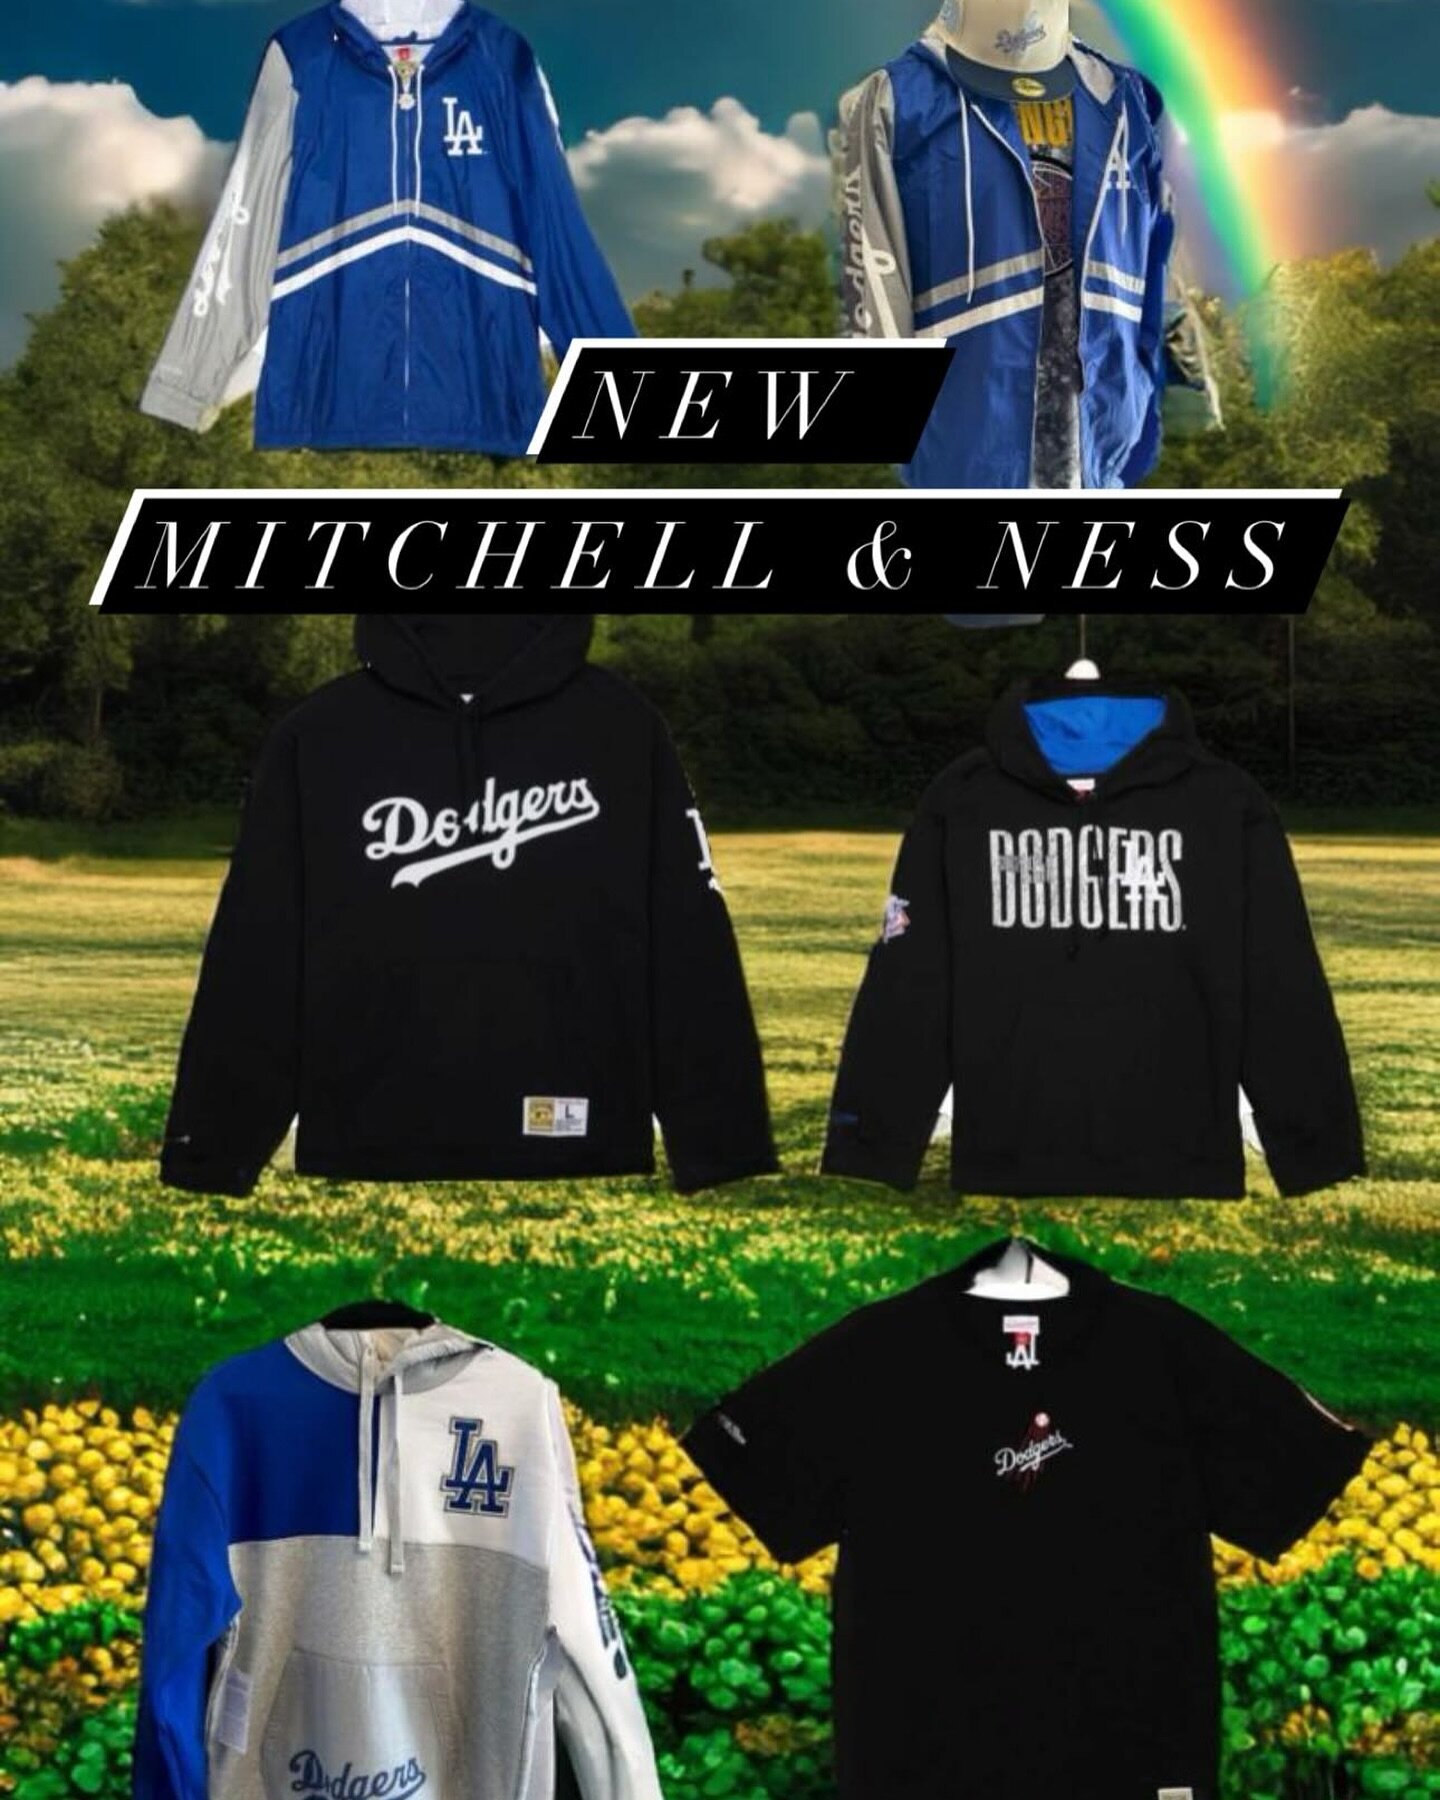 JUST IN🔥🔥🔥

New Mitchell &amp; Ness Dodgers gear